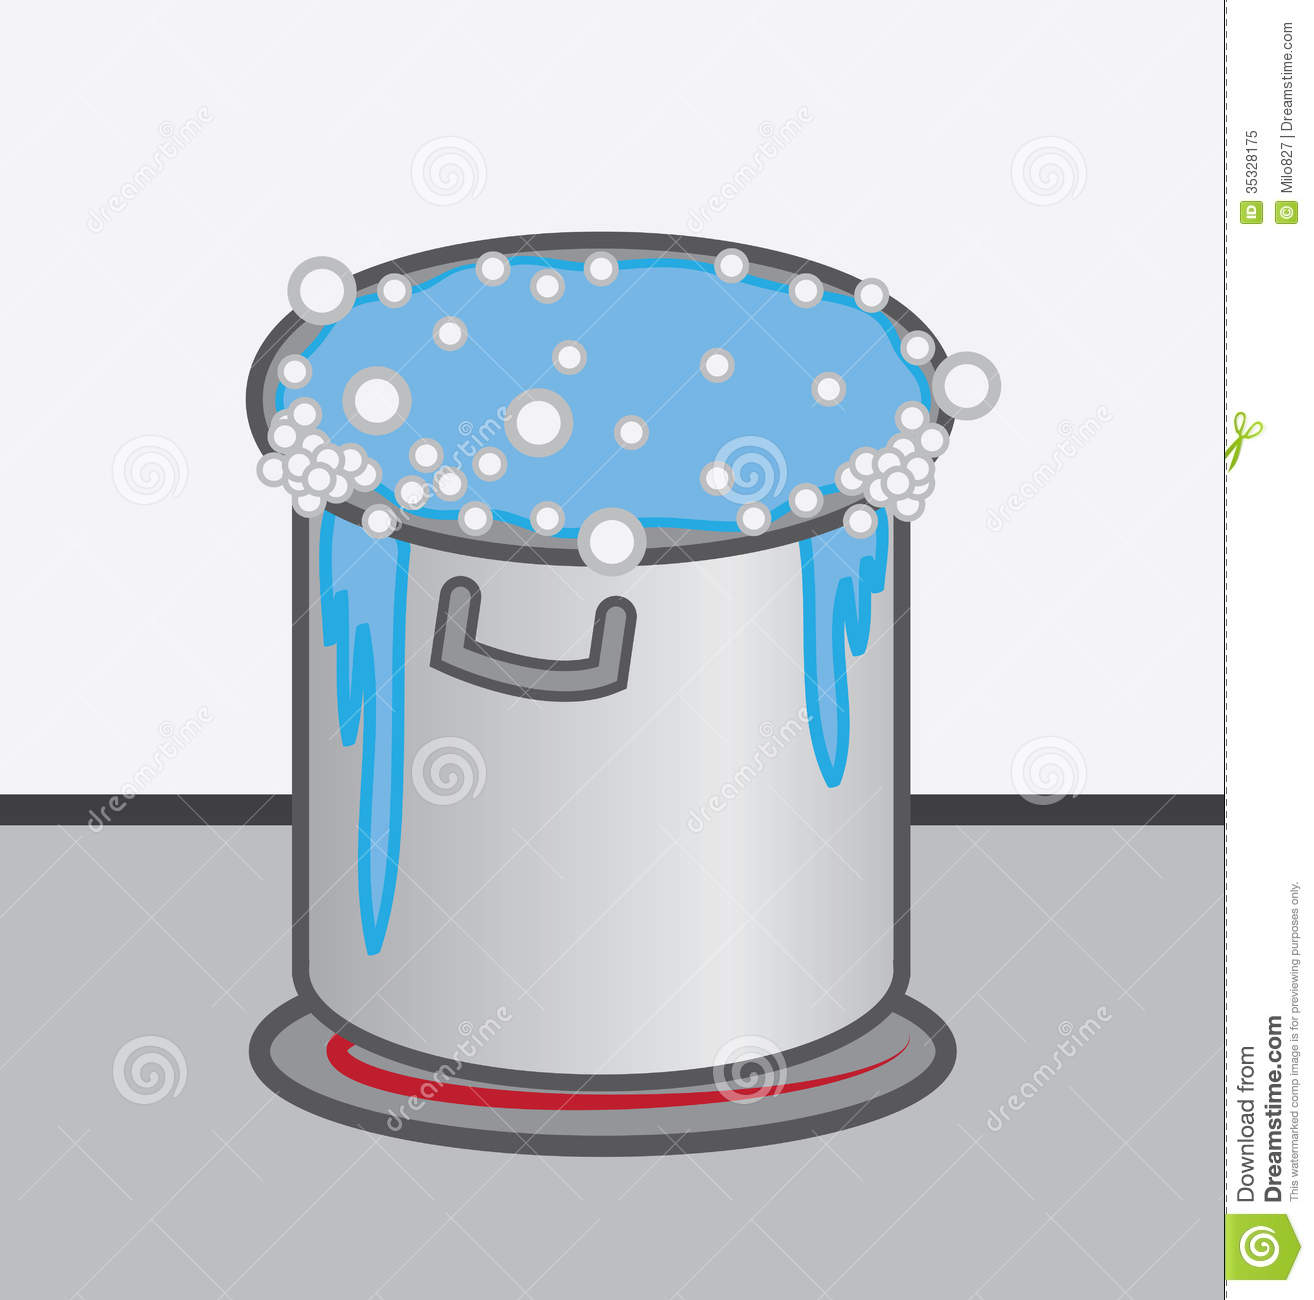 Boil cooking clipart.